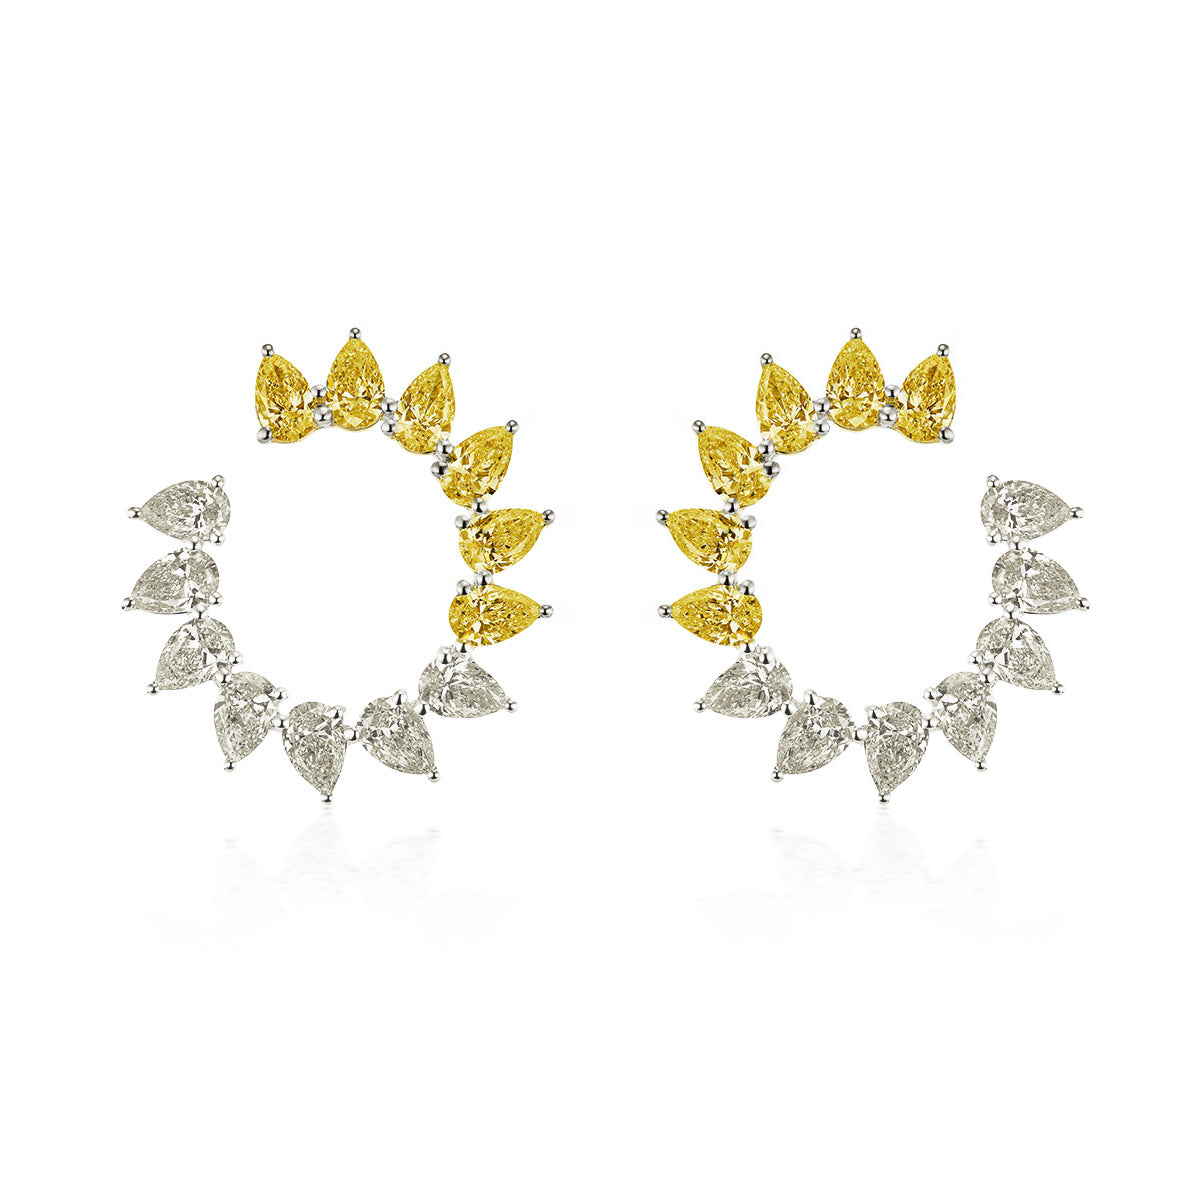 This & That Sunshine Front-to-Back Hoops in White Gold with Fancy Yellow and White Pear Diamonds